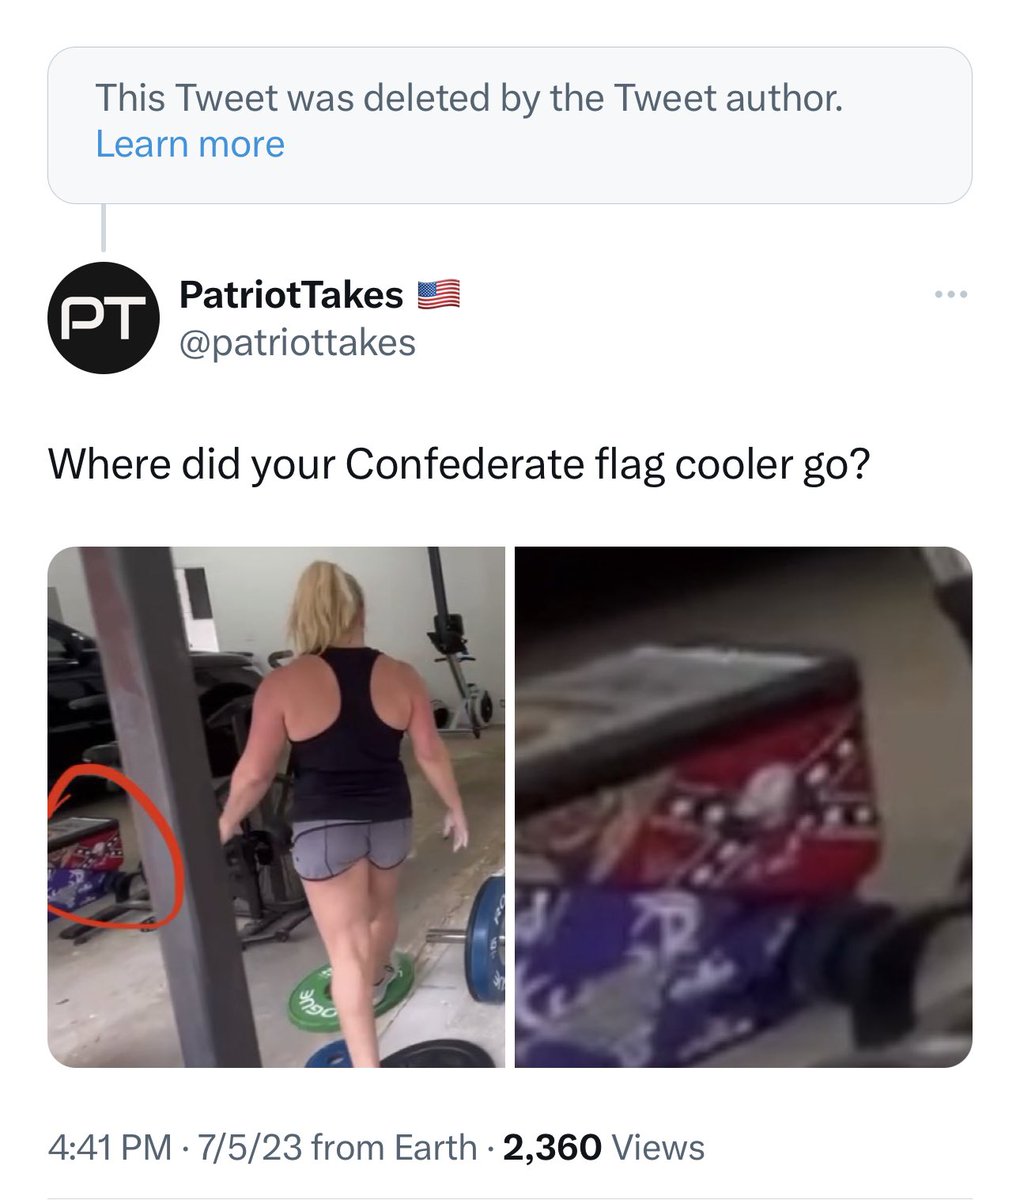 RT @patriottakes: Why did Marjorie Taylor Greene delete her latest workout video? https://t.co/etIPlEcbKH